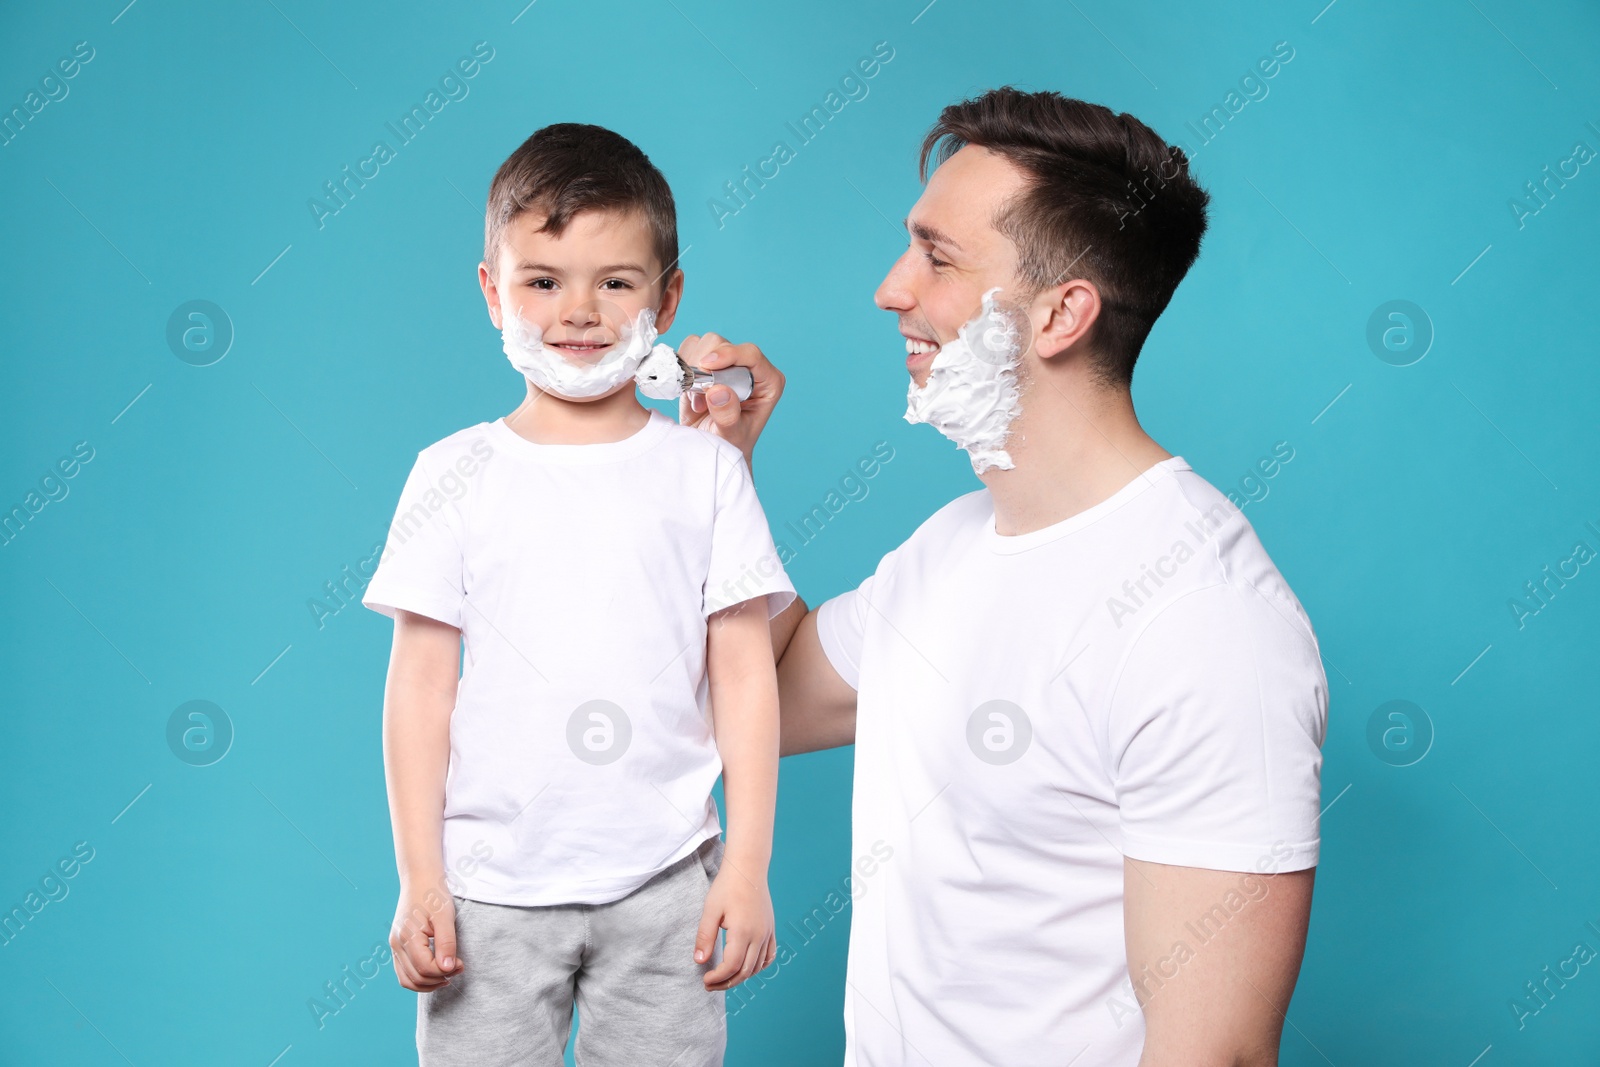 Photo of Dad applying shaving foam onto son's face against color background